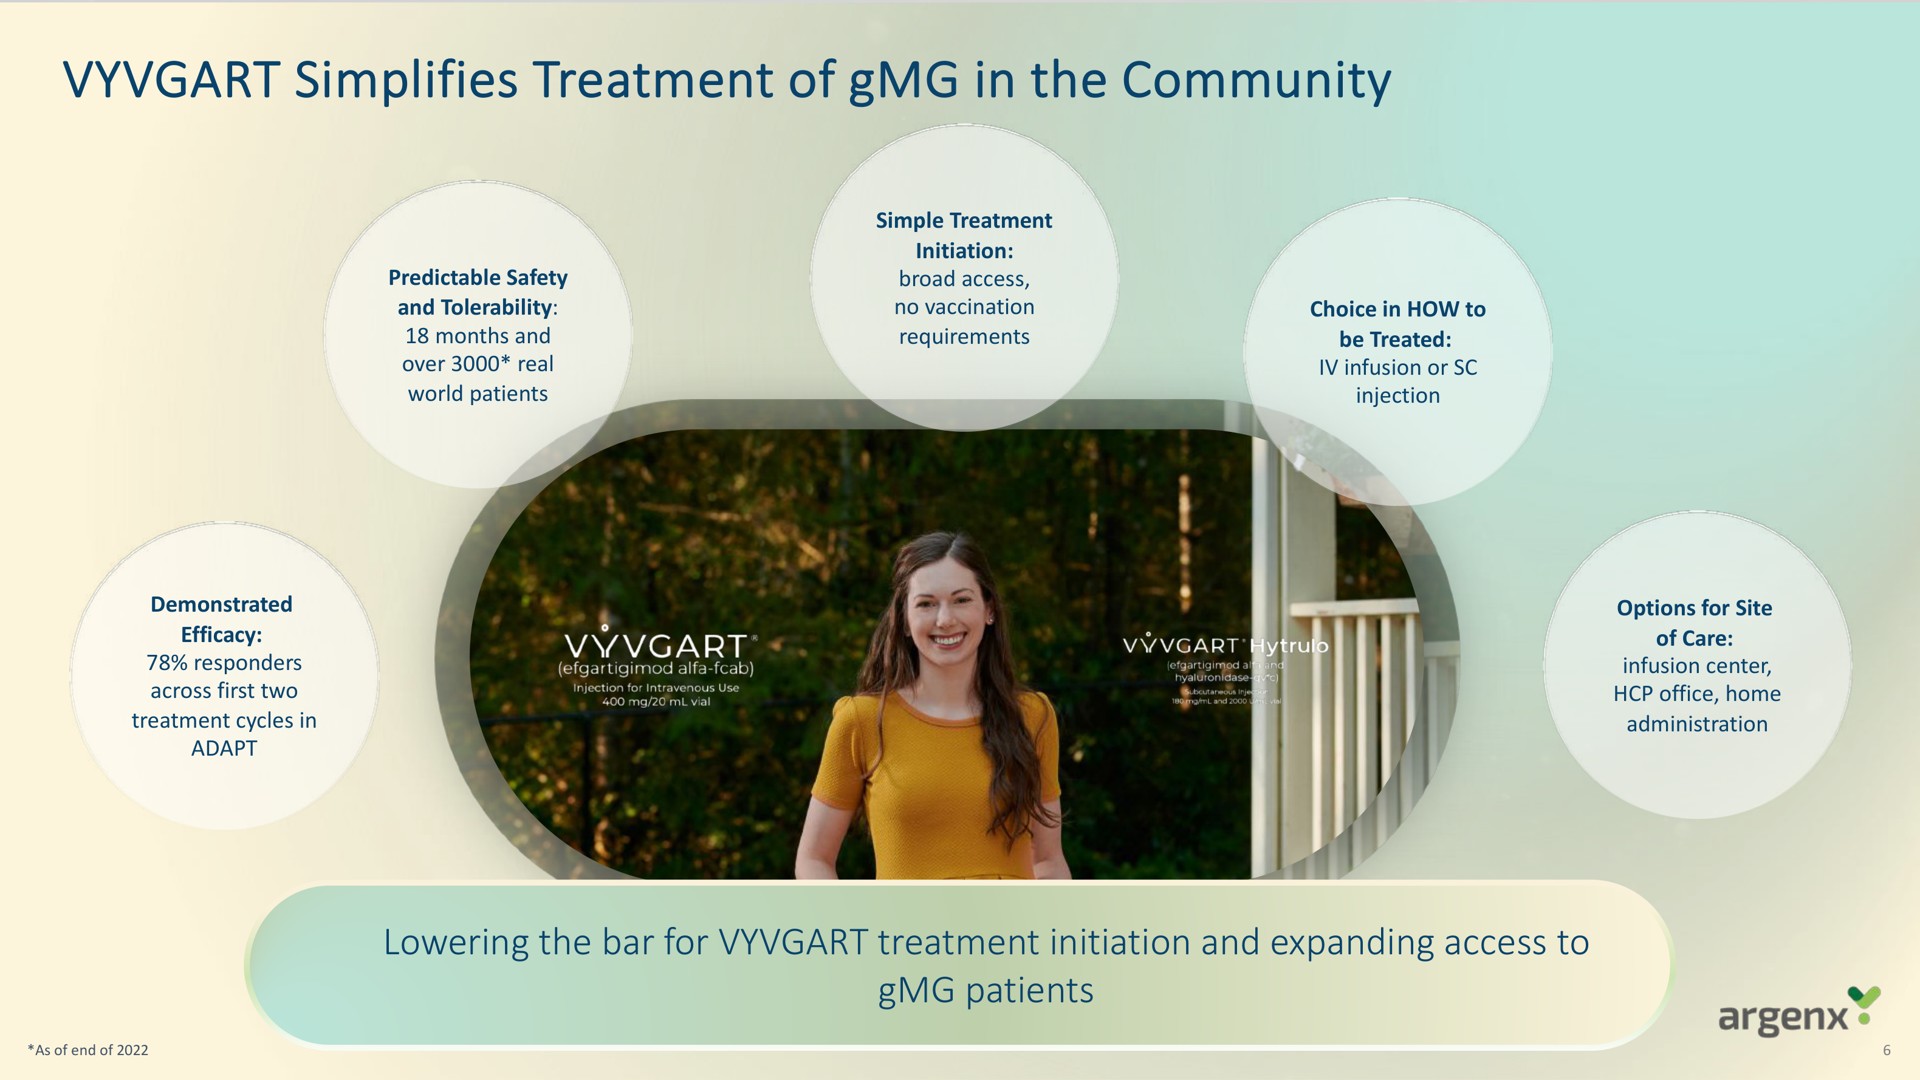 simplifies treatment of in the community | argenx SE